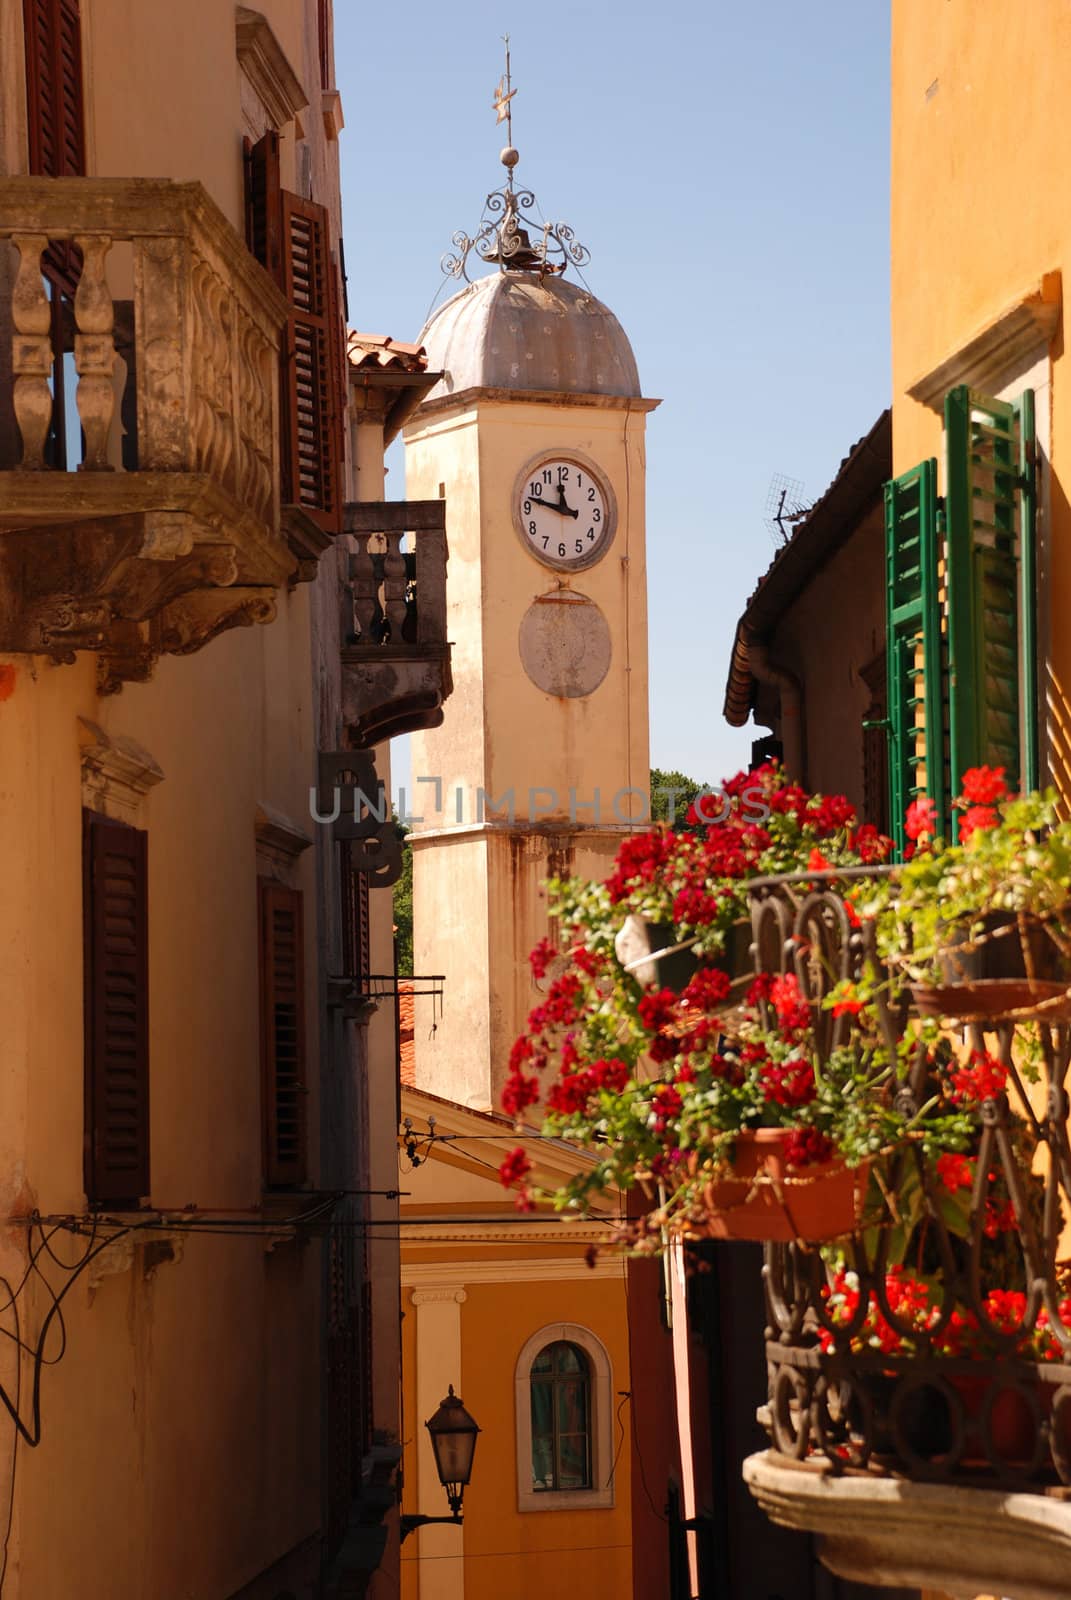 The bell tower in the center of Labin city, Croatia